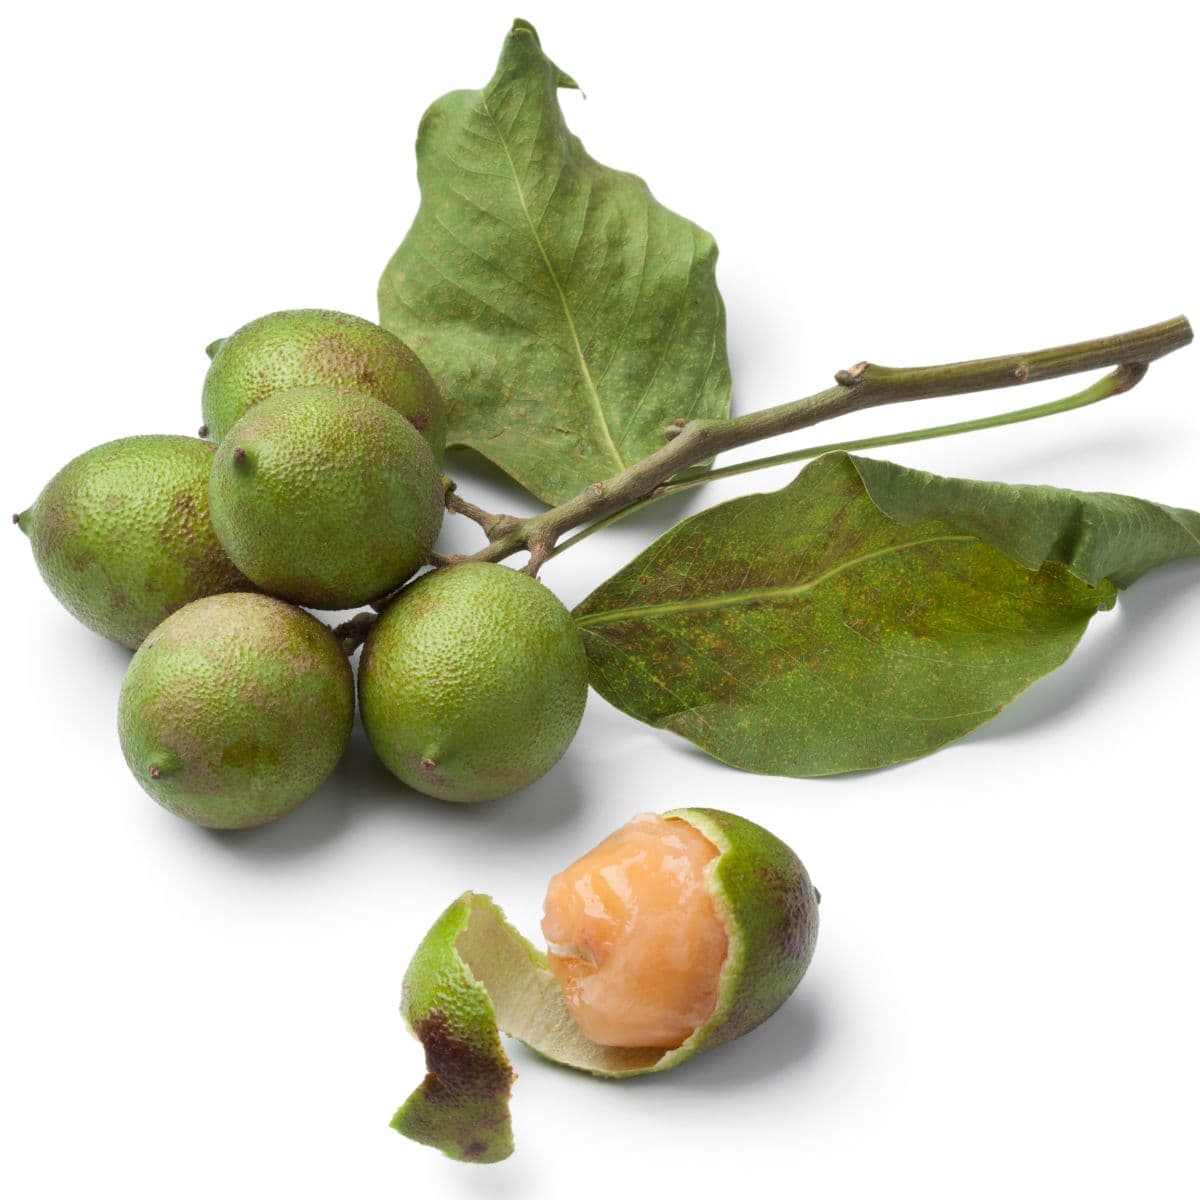 Guinep, Chenet or Spanish Lime: Benefits, Uses and More